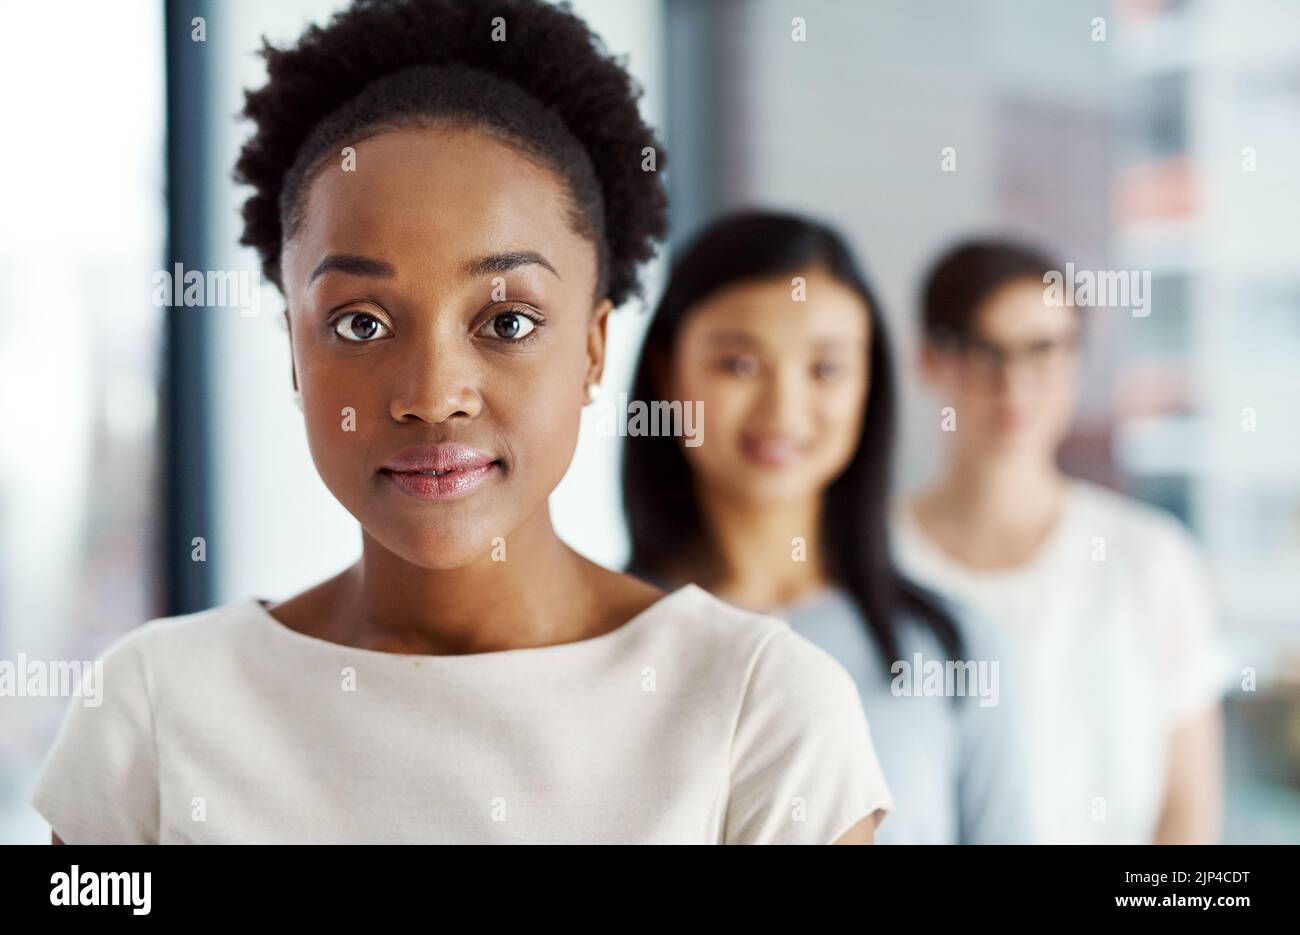 Woman leading diverse team of creative people with motivation, power and a vision for a global business. Closeup portrait, headshot and face of Stock Photo